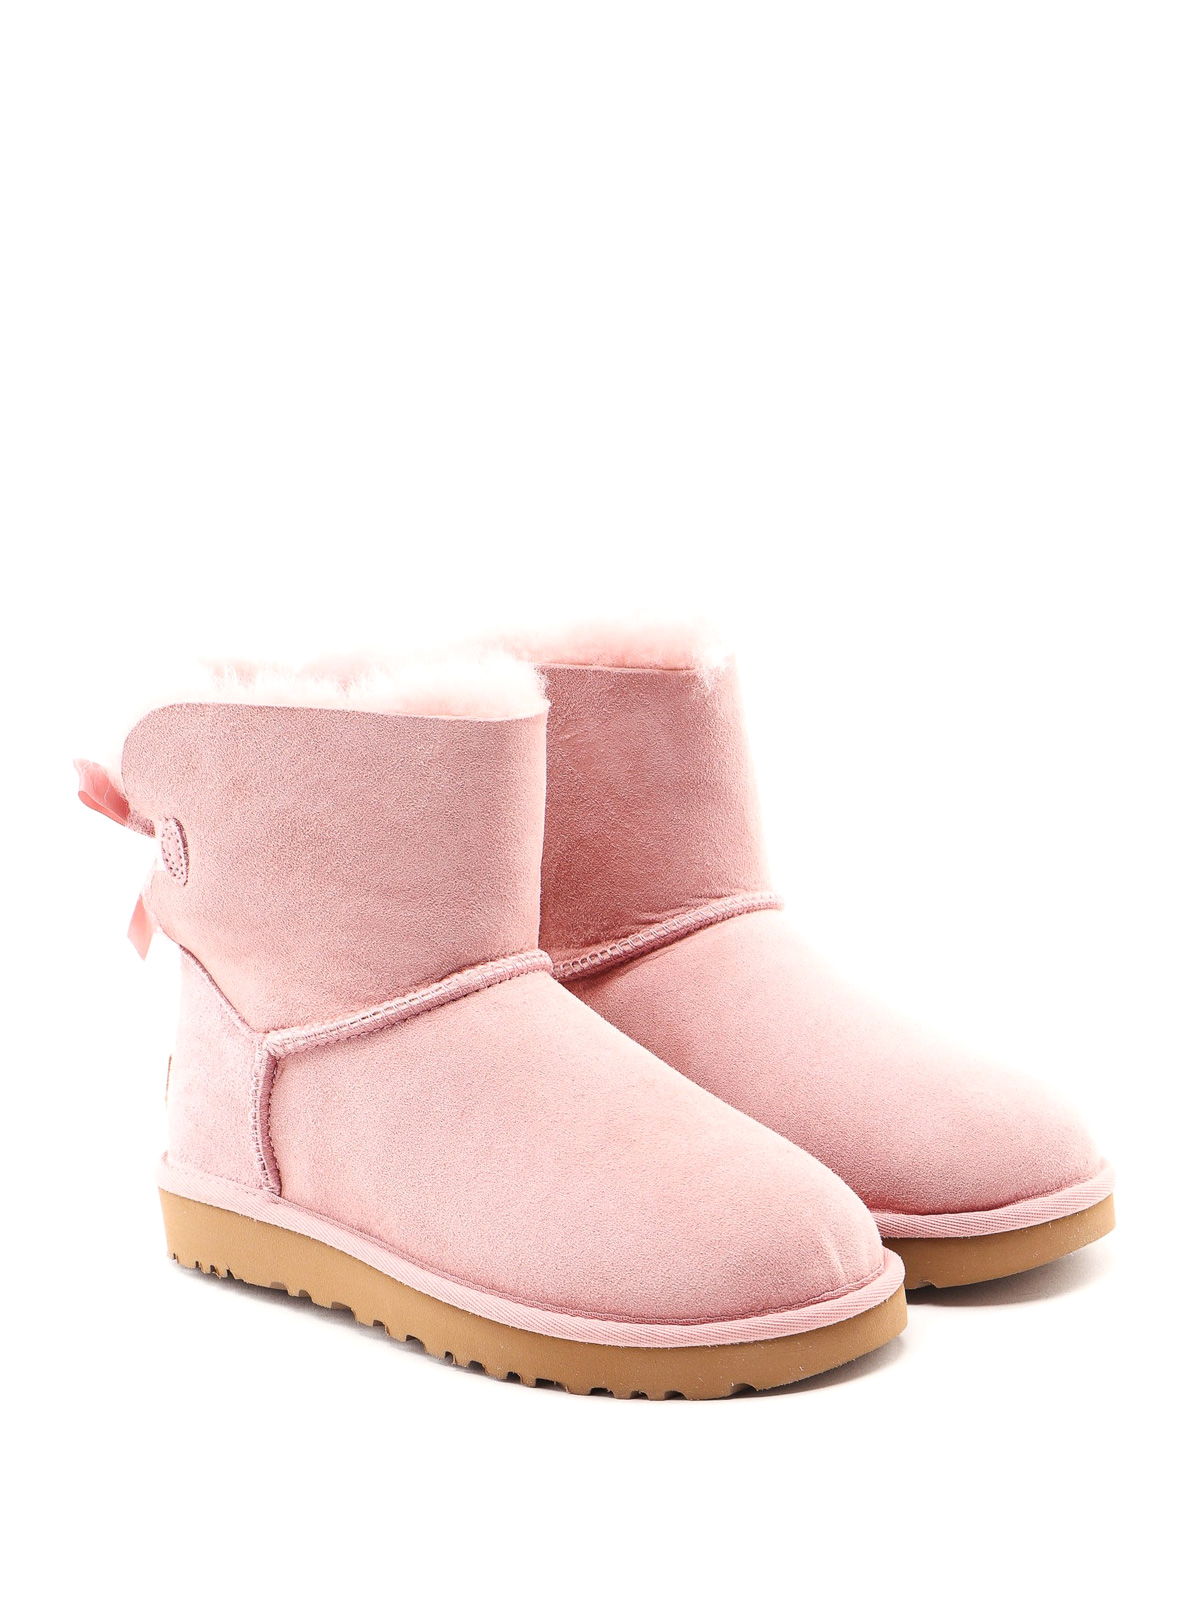 ugg boots pink with bows